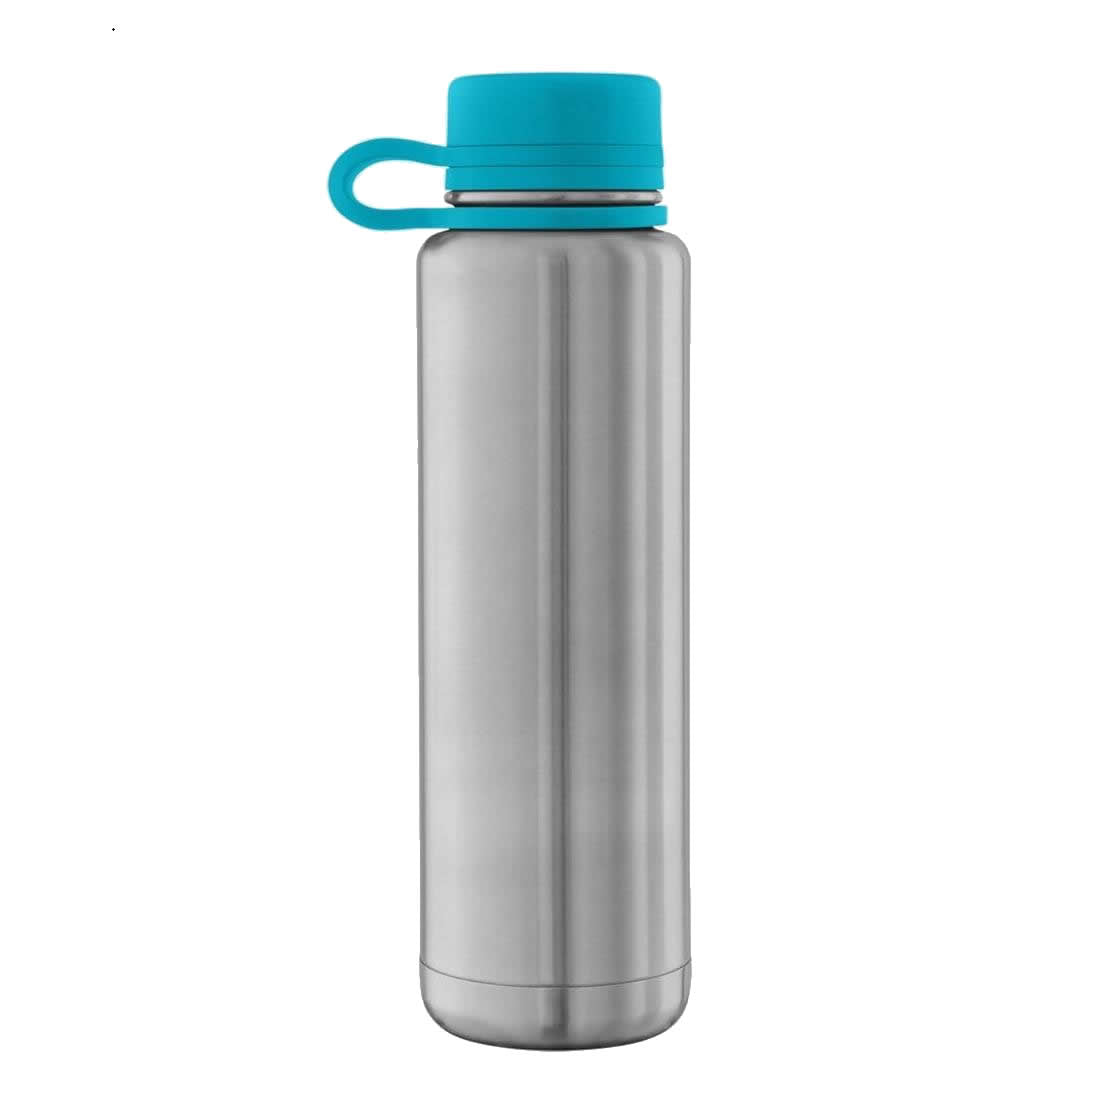 PlanetBox Stainless Steel Water Bottle 18oz/532ml